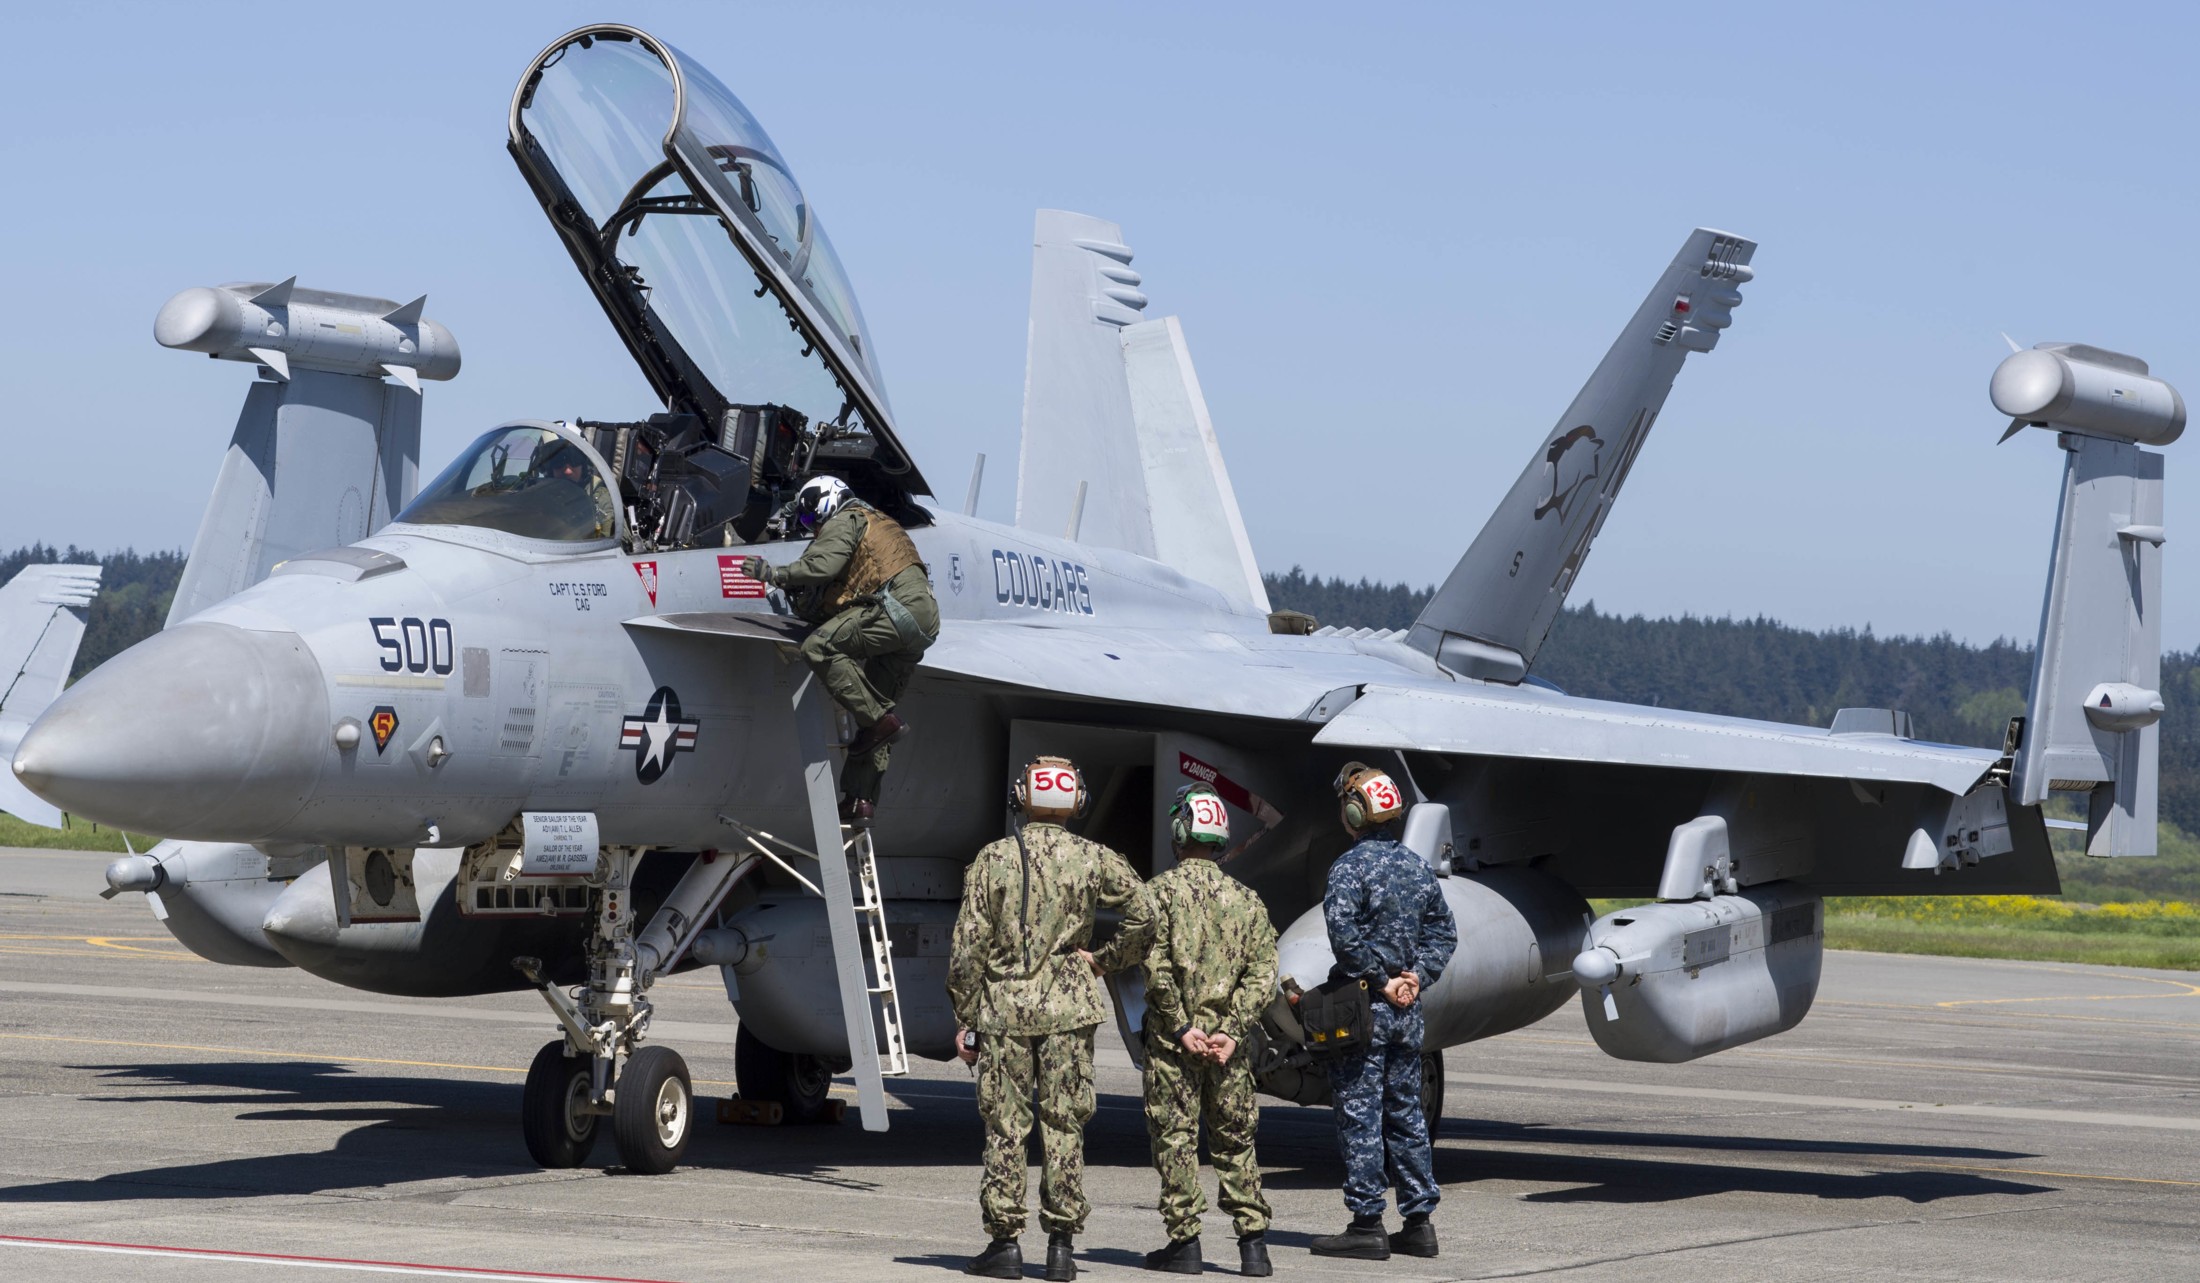 vaq-139 cougars electronic attack squadron us navy ea-18g growler cvw-17 nas whidbey island 107